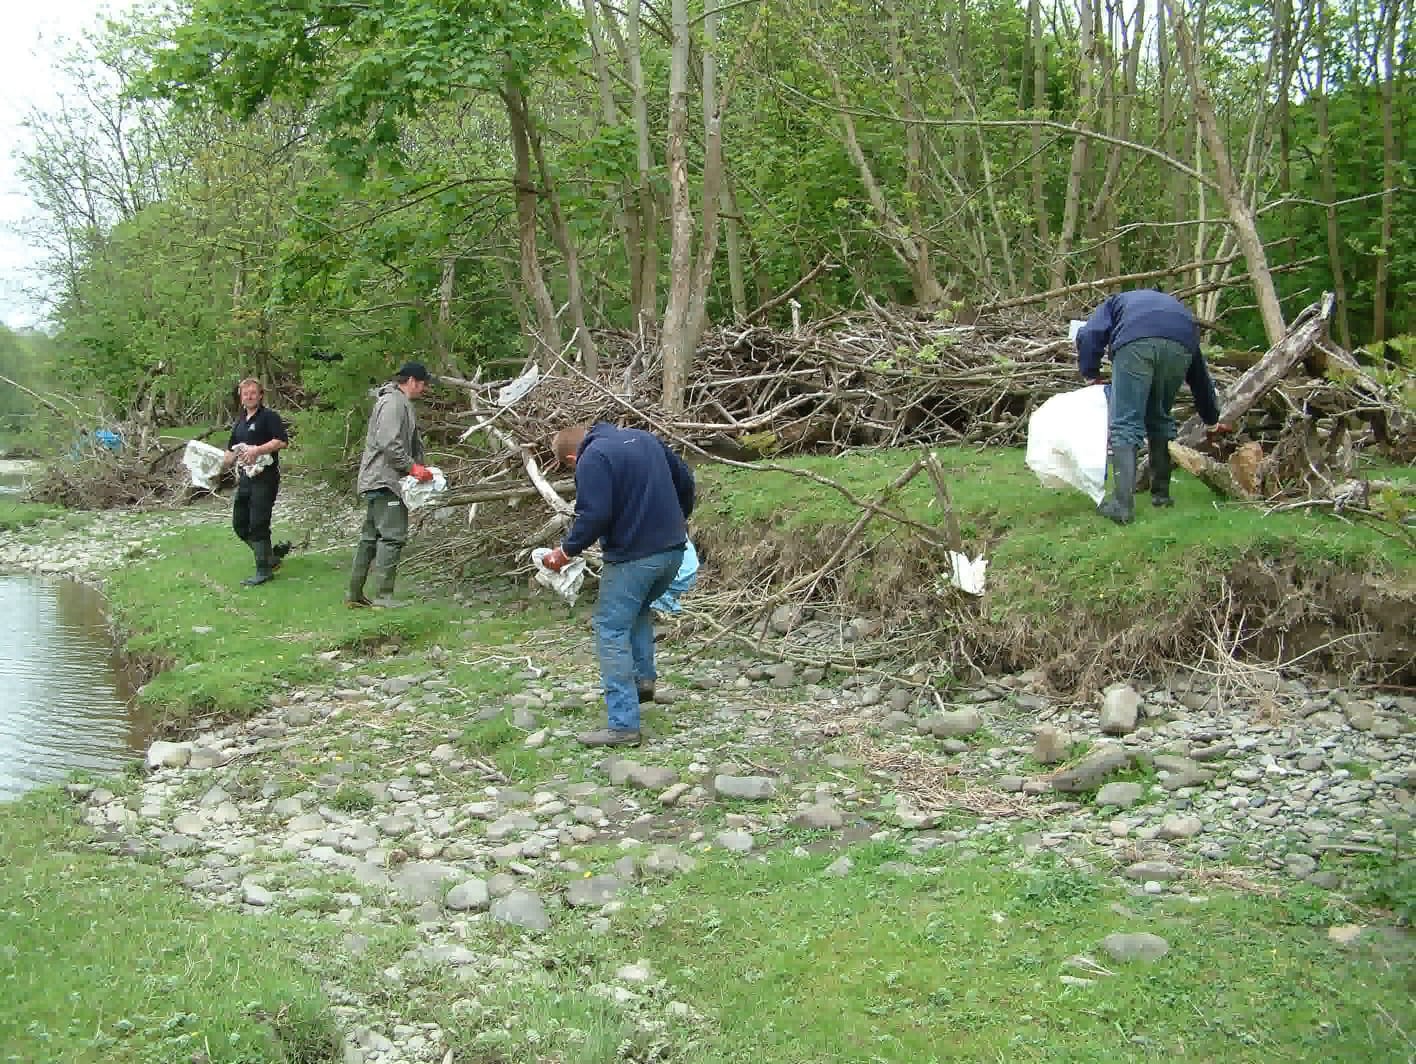 The Foundation and Keep Wales Tidy led the 2004 upper Wye and Usk litter clear ups